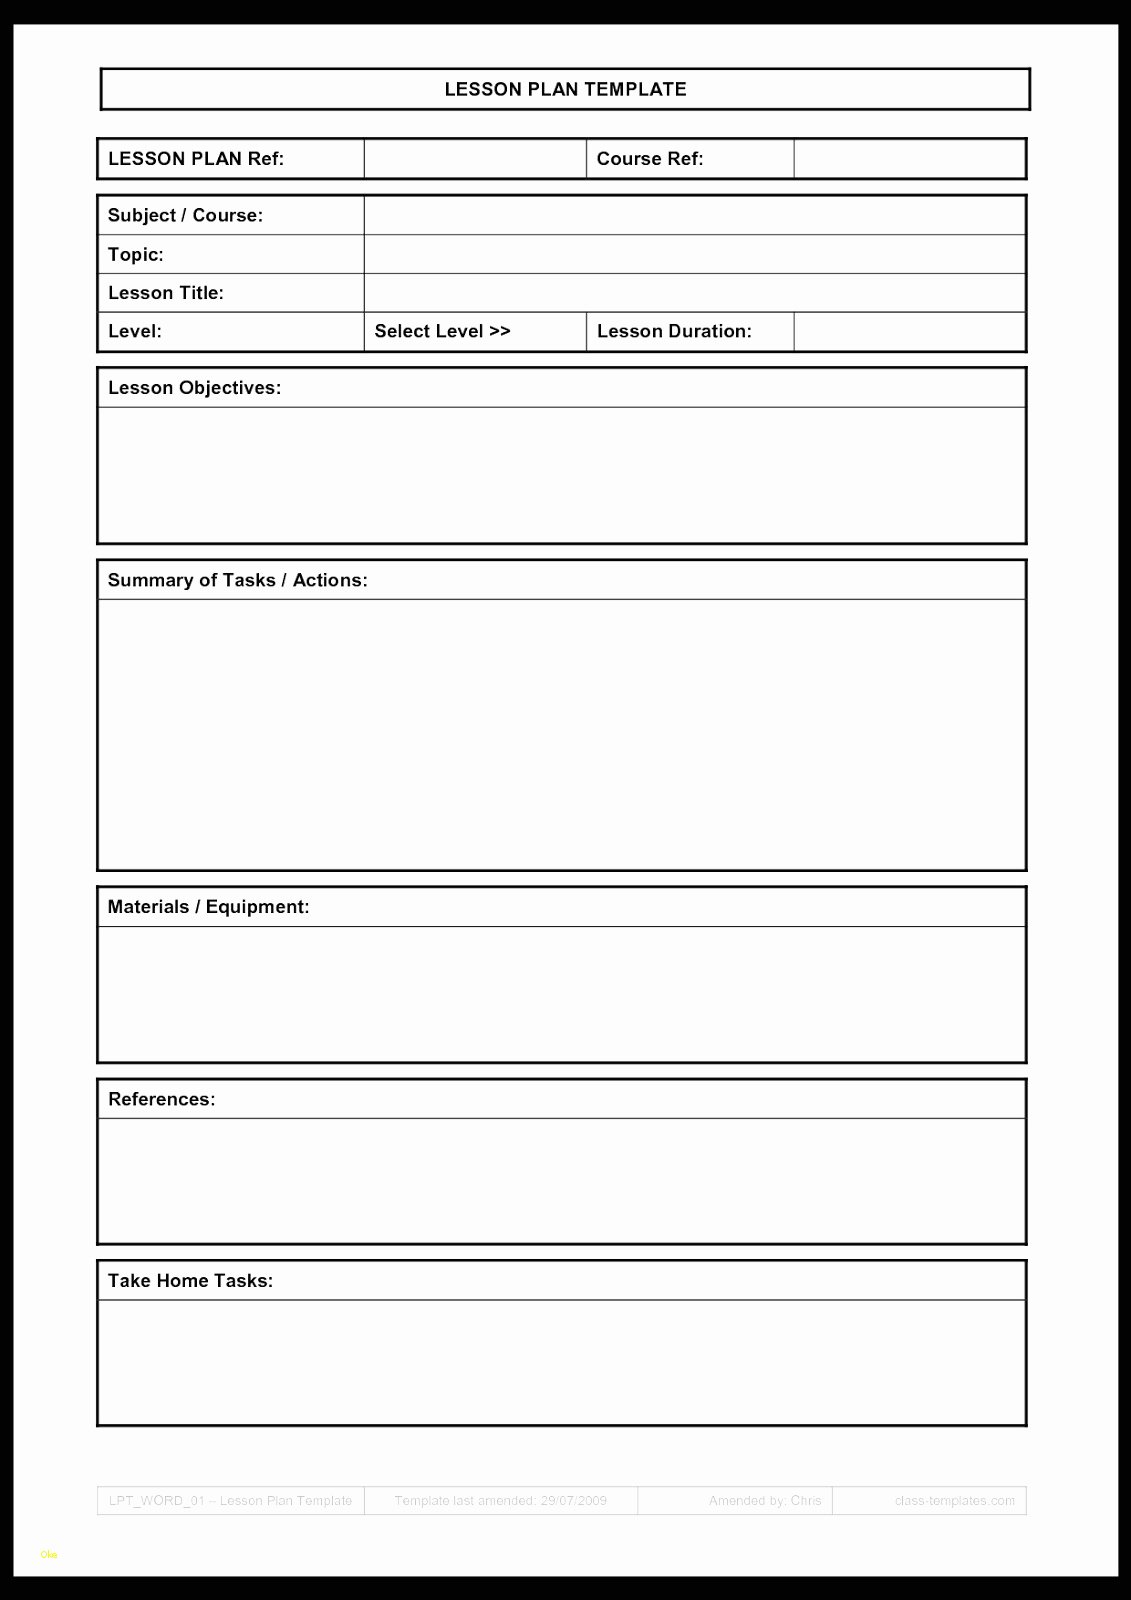 Free Editable Lesson Plan Template Awesome Awesome Editable Lesson Plan Template